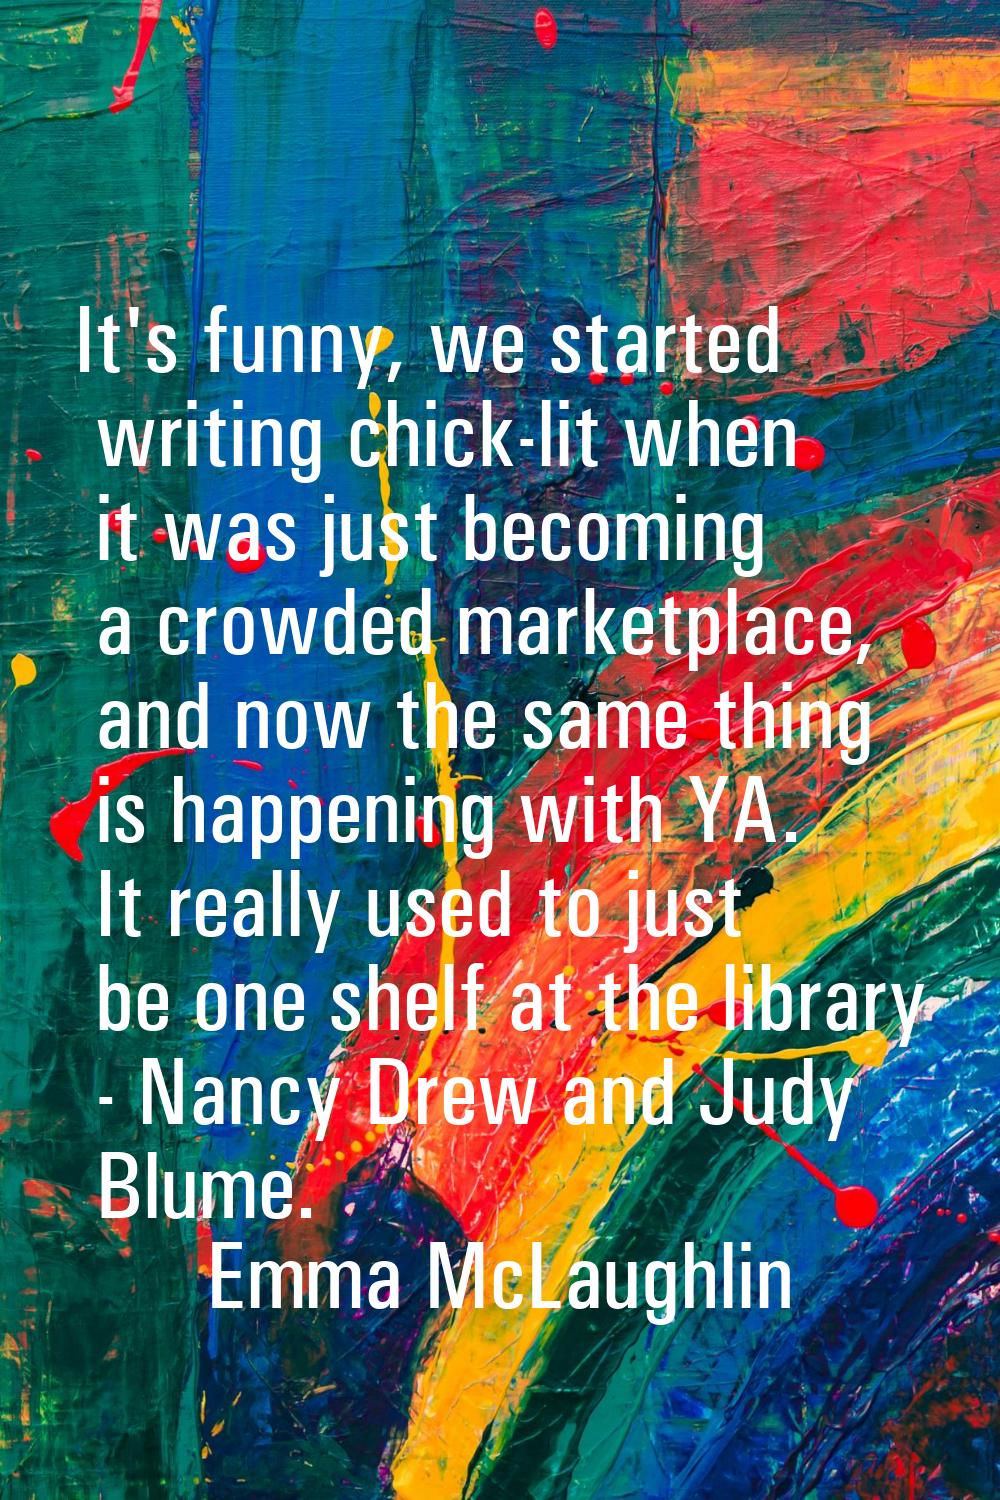 It's funny, we started writing chick-lit when it was just becoming a crowded marketplace, and now t